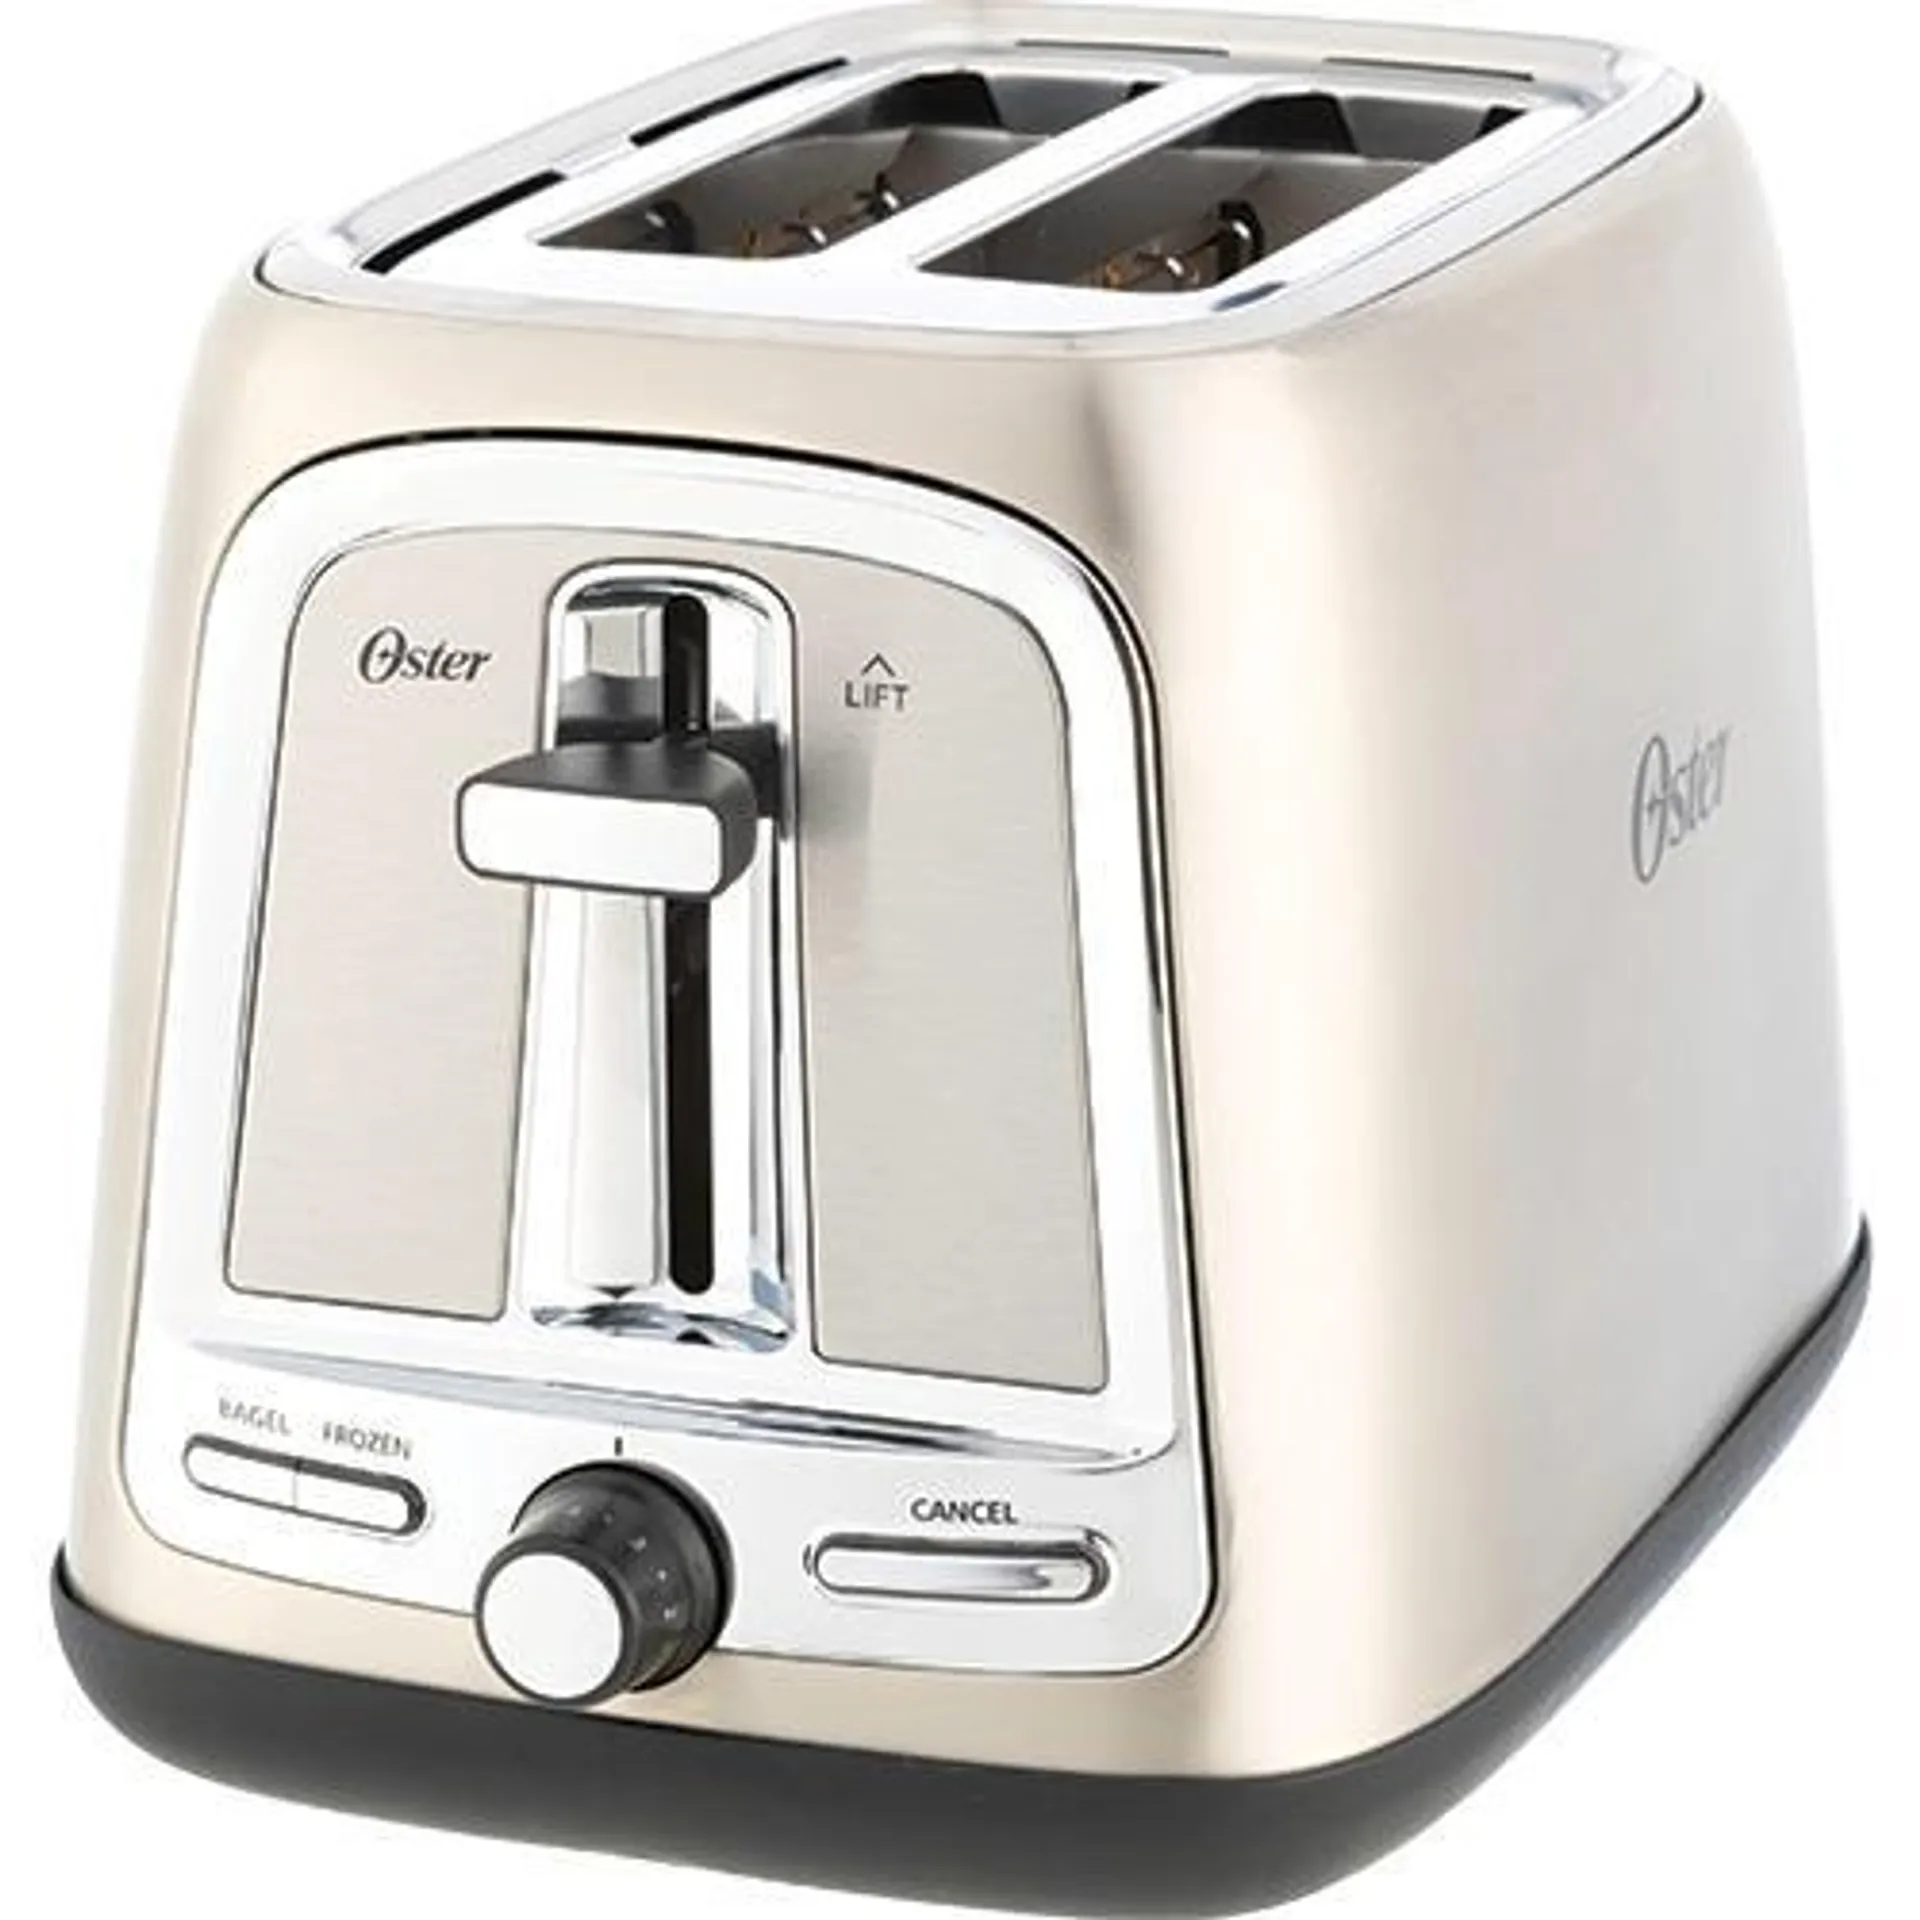 2-Slice Toaster With Advanced Toast Technology - Stainless Steel